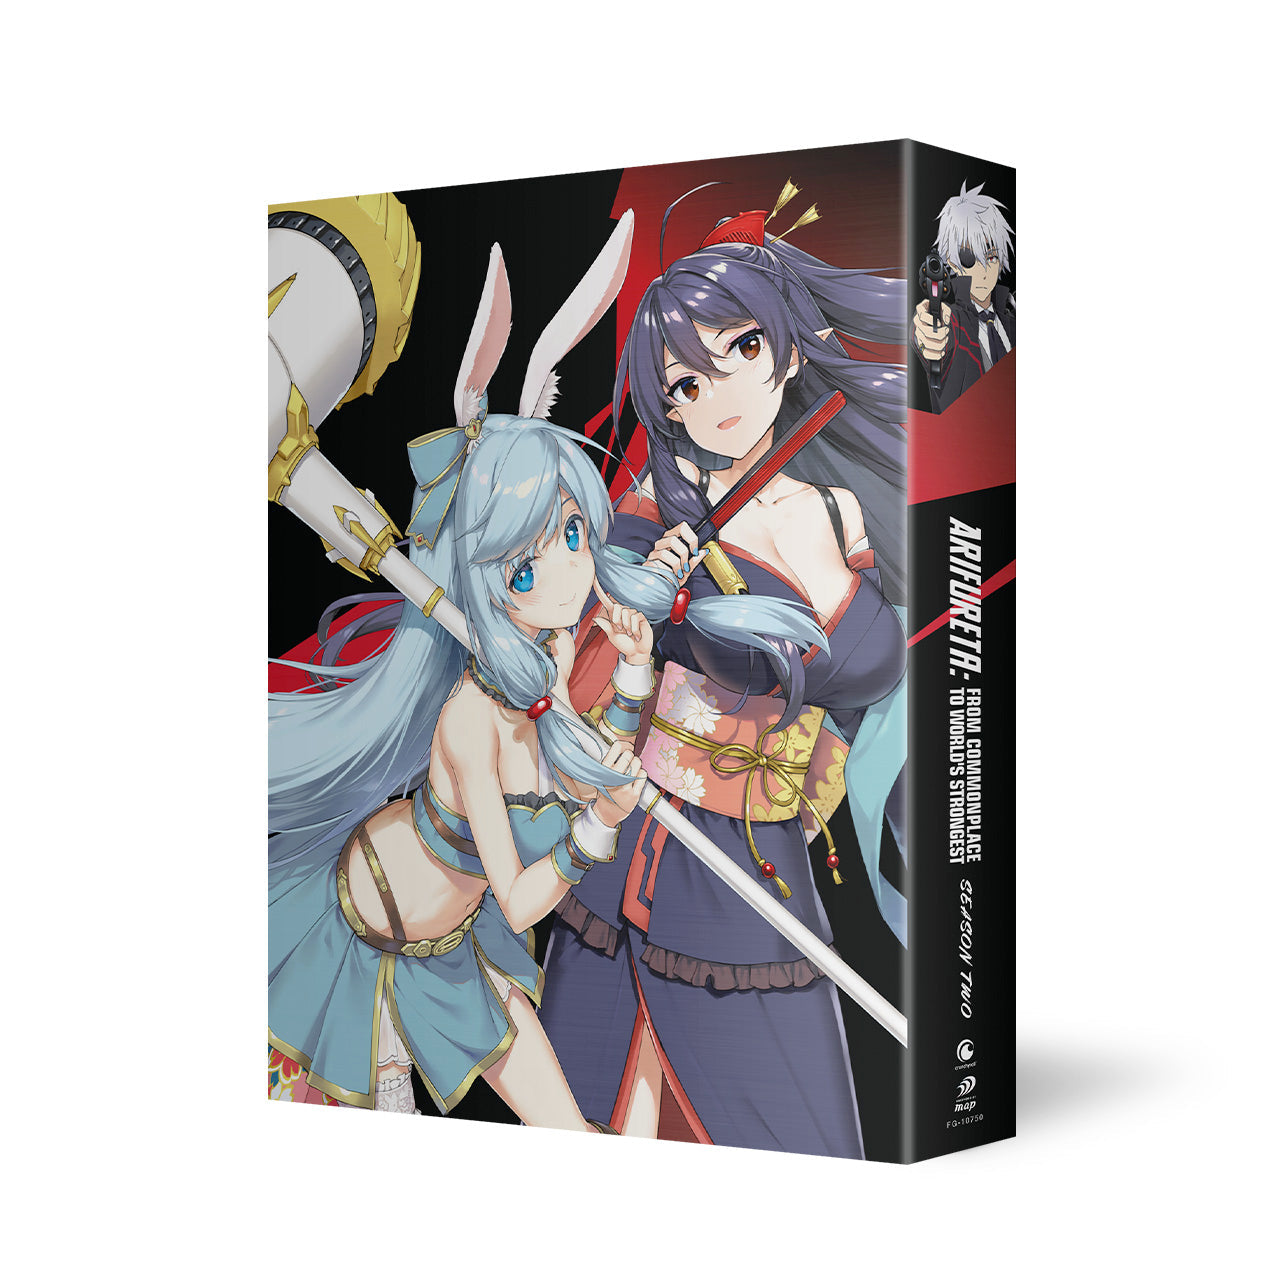 Arifureta: From Commonplace to World's Strongest - Season 2 - BD/DVD - LE image count 2